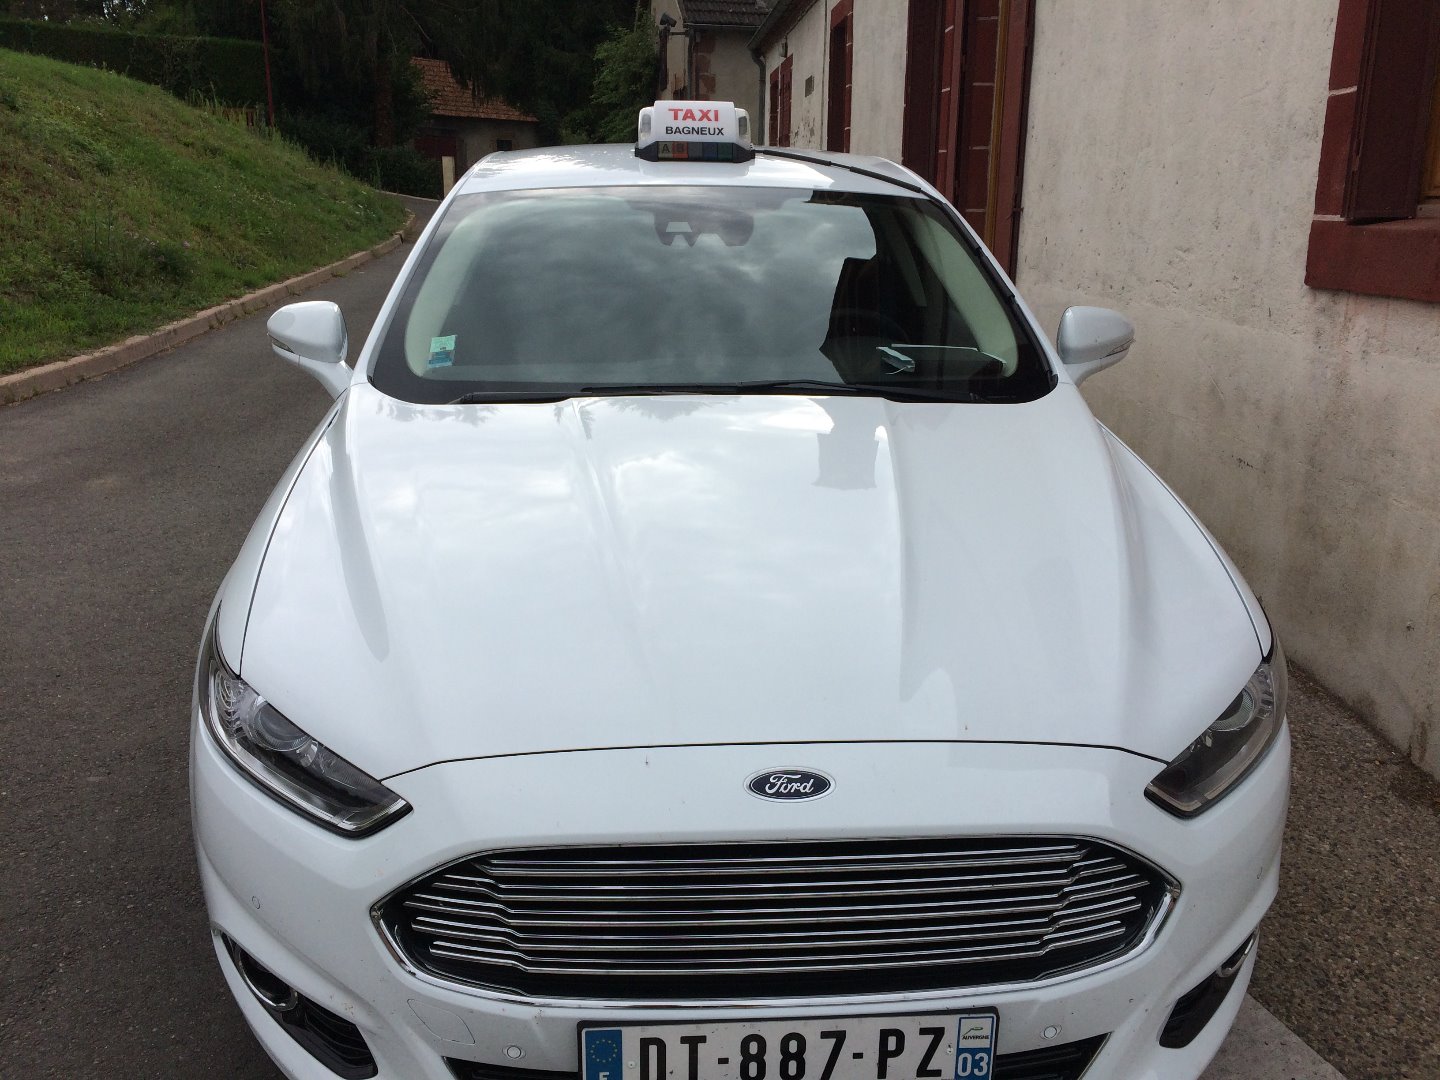 Taxi Bagneux: Ford